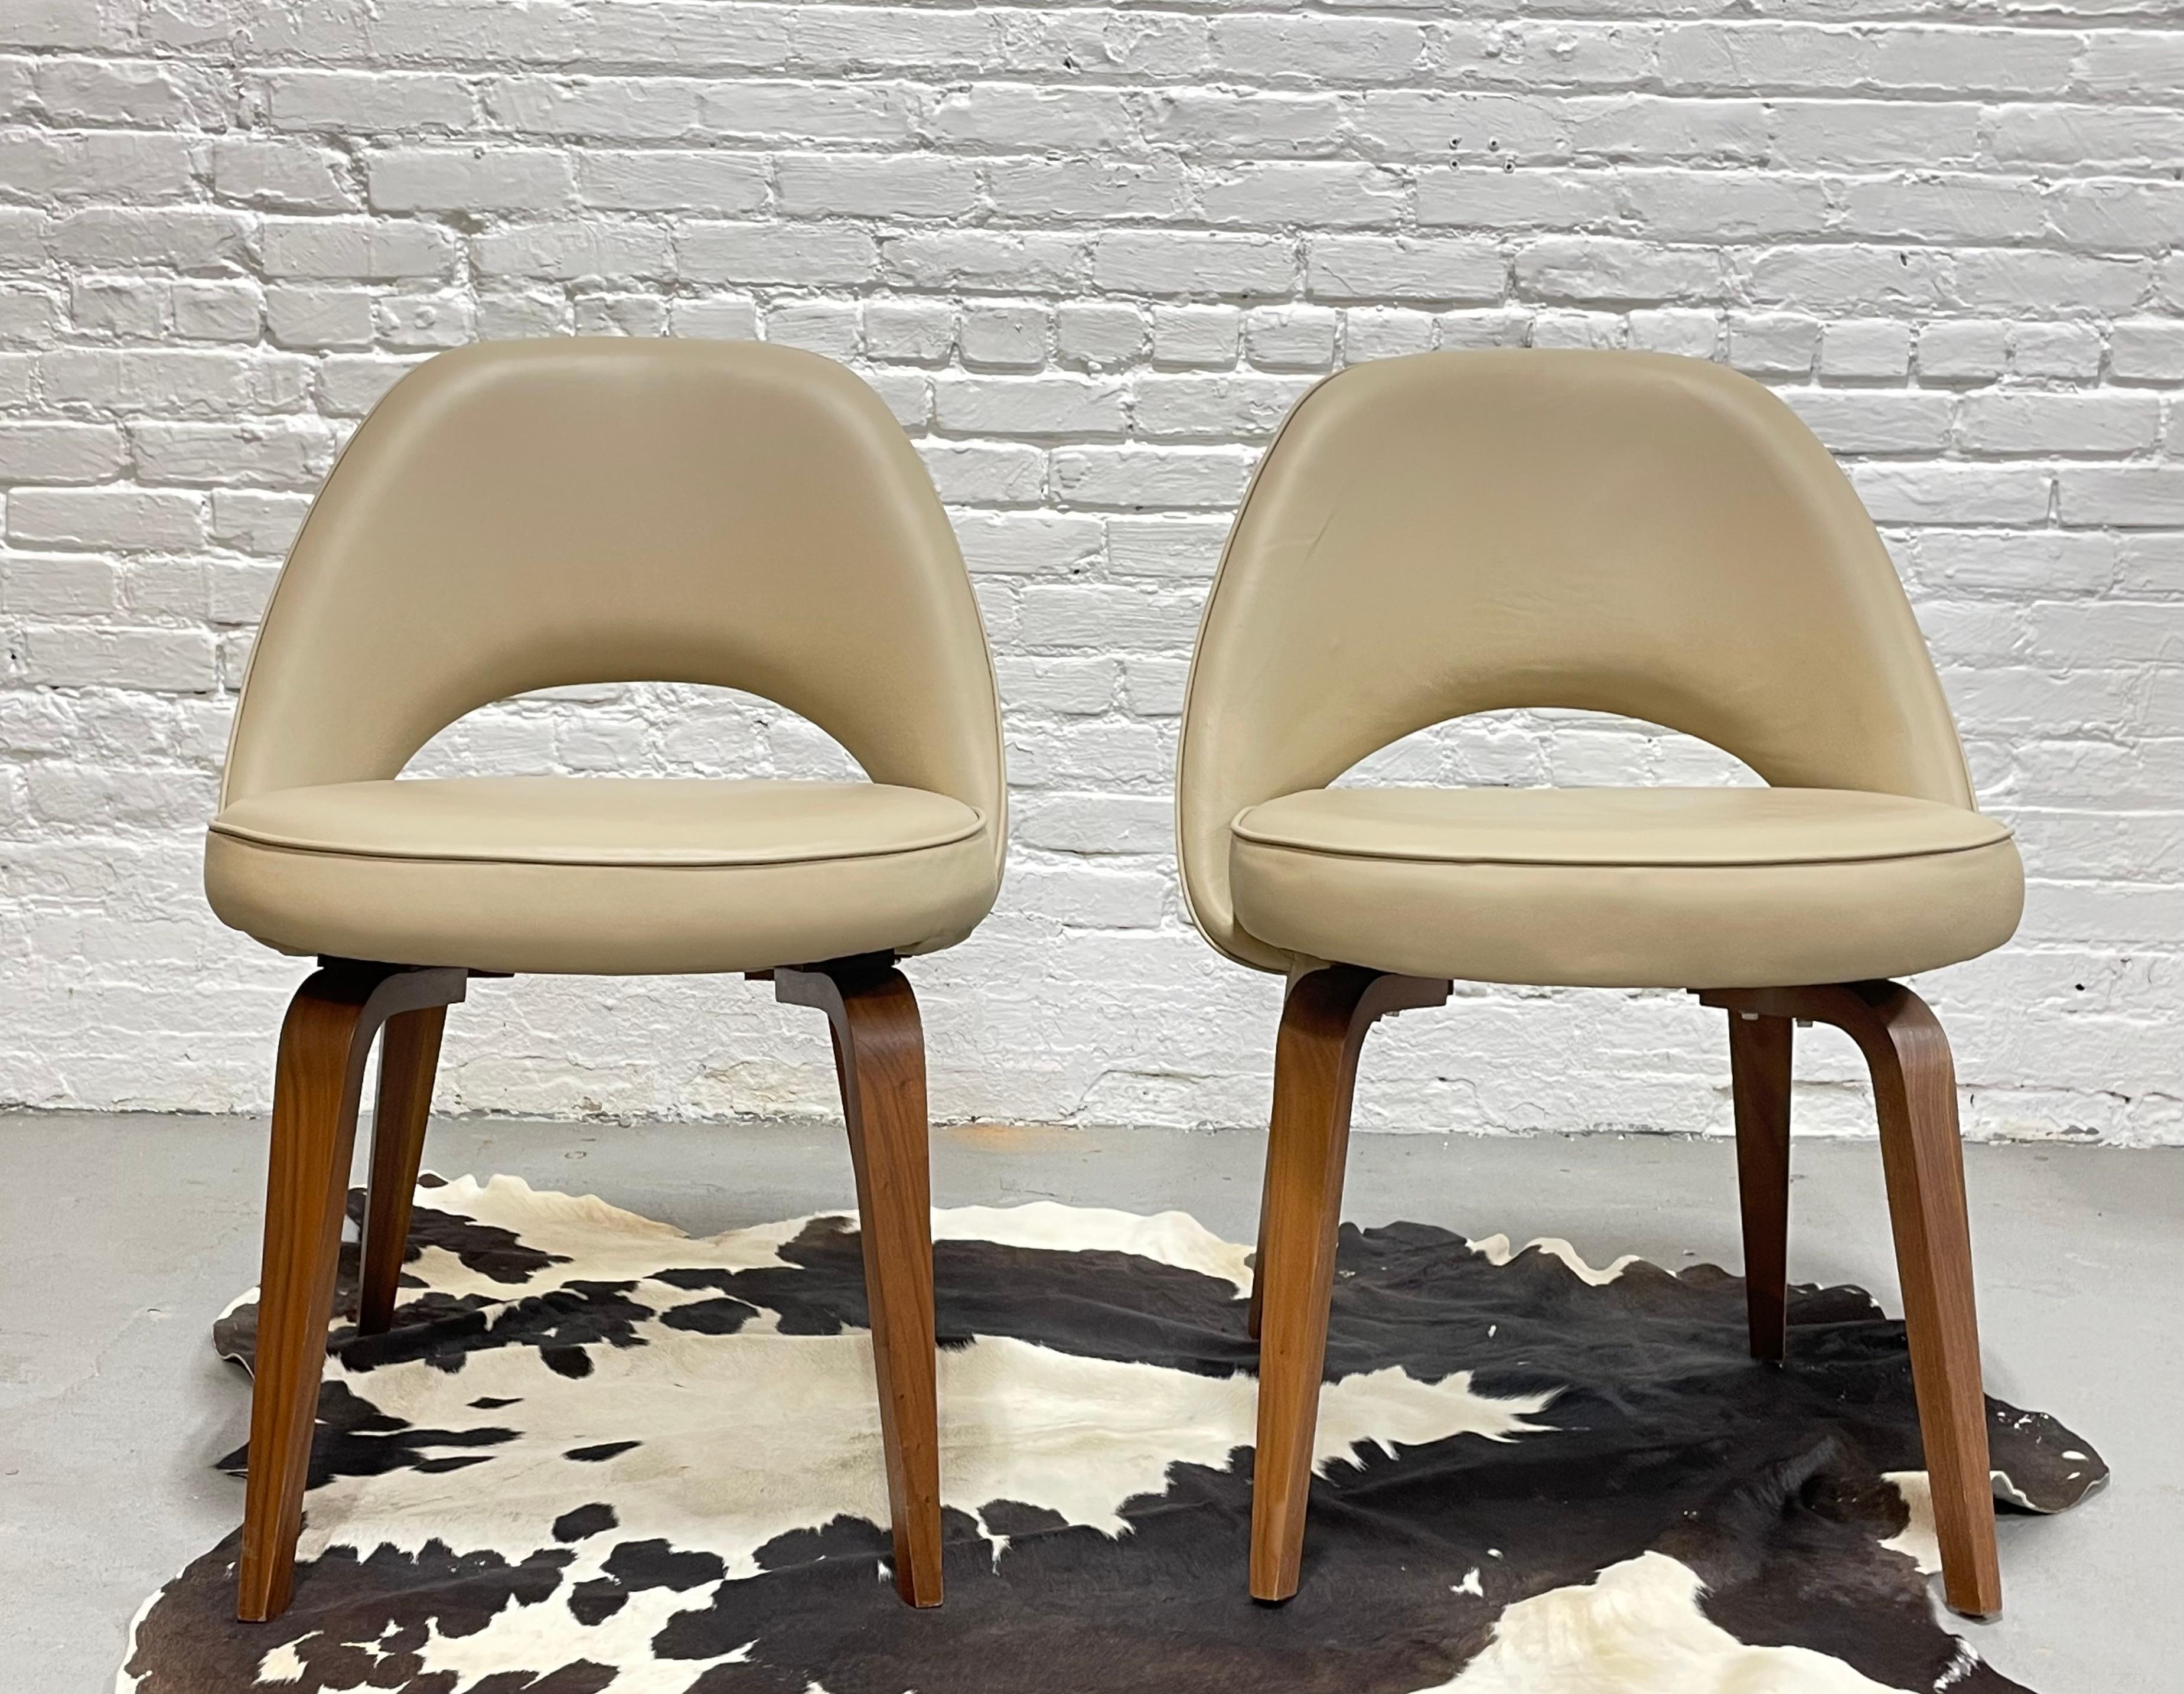 Pair of Mid-Century Modern Saarinen styled side chairs, upholstered in light biege vinyl. The bentwood legs are the highlight of this great pair and contrast beautifully with the lighter upholstery. This great set would look fabulous as side chairs